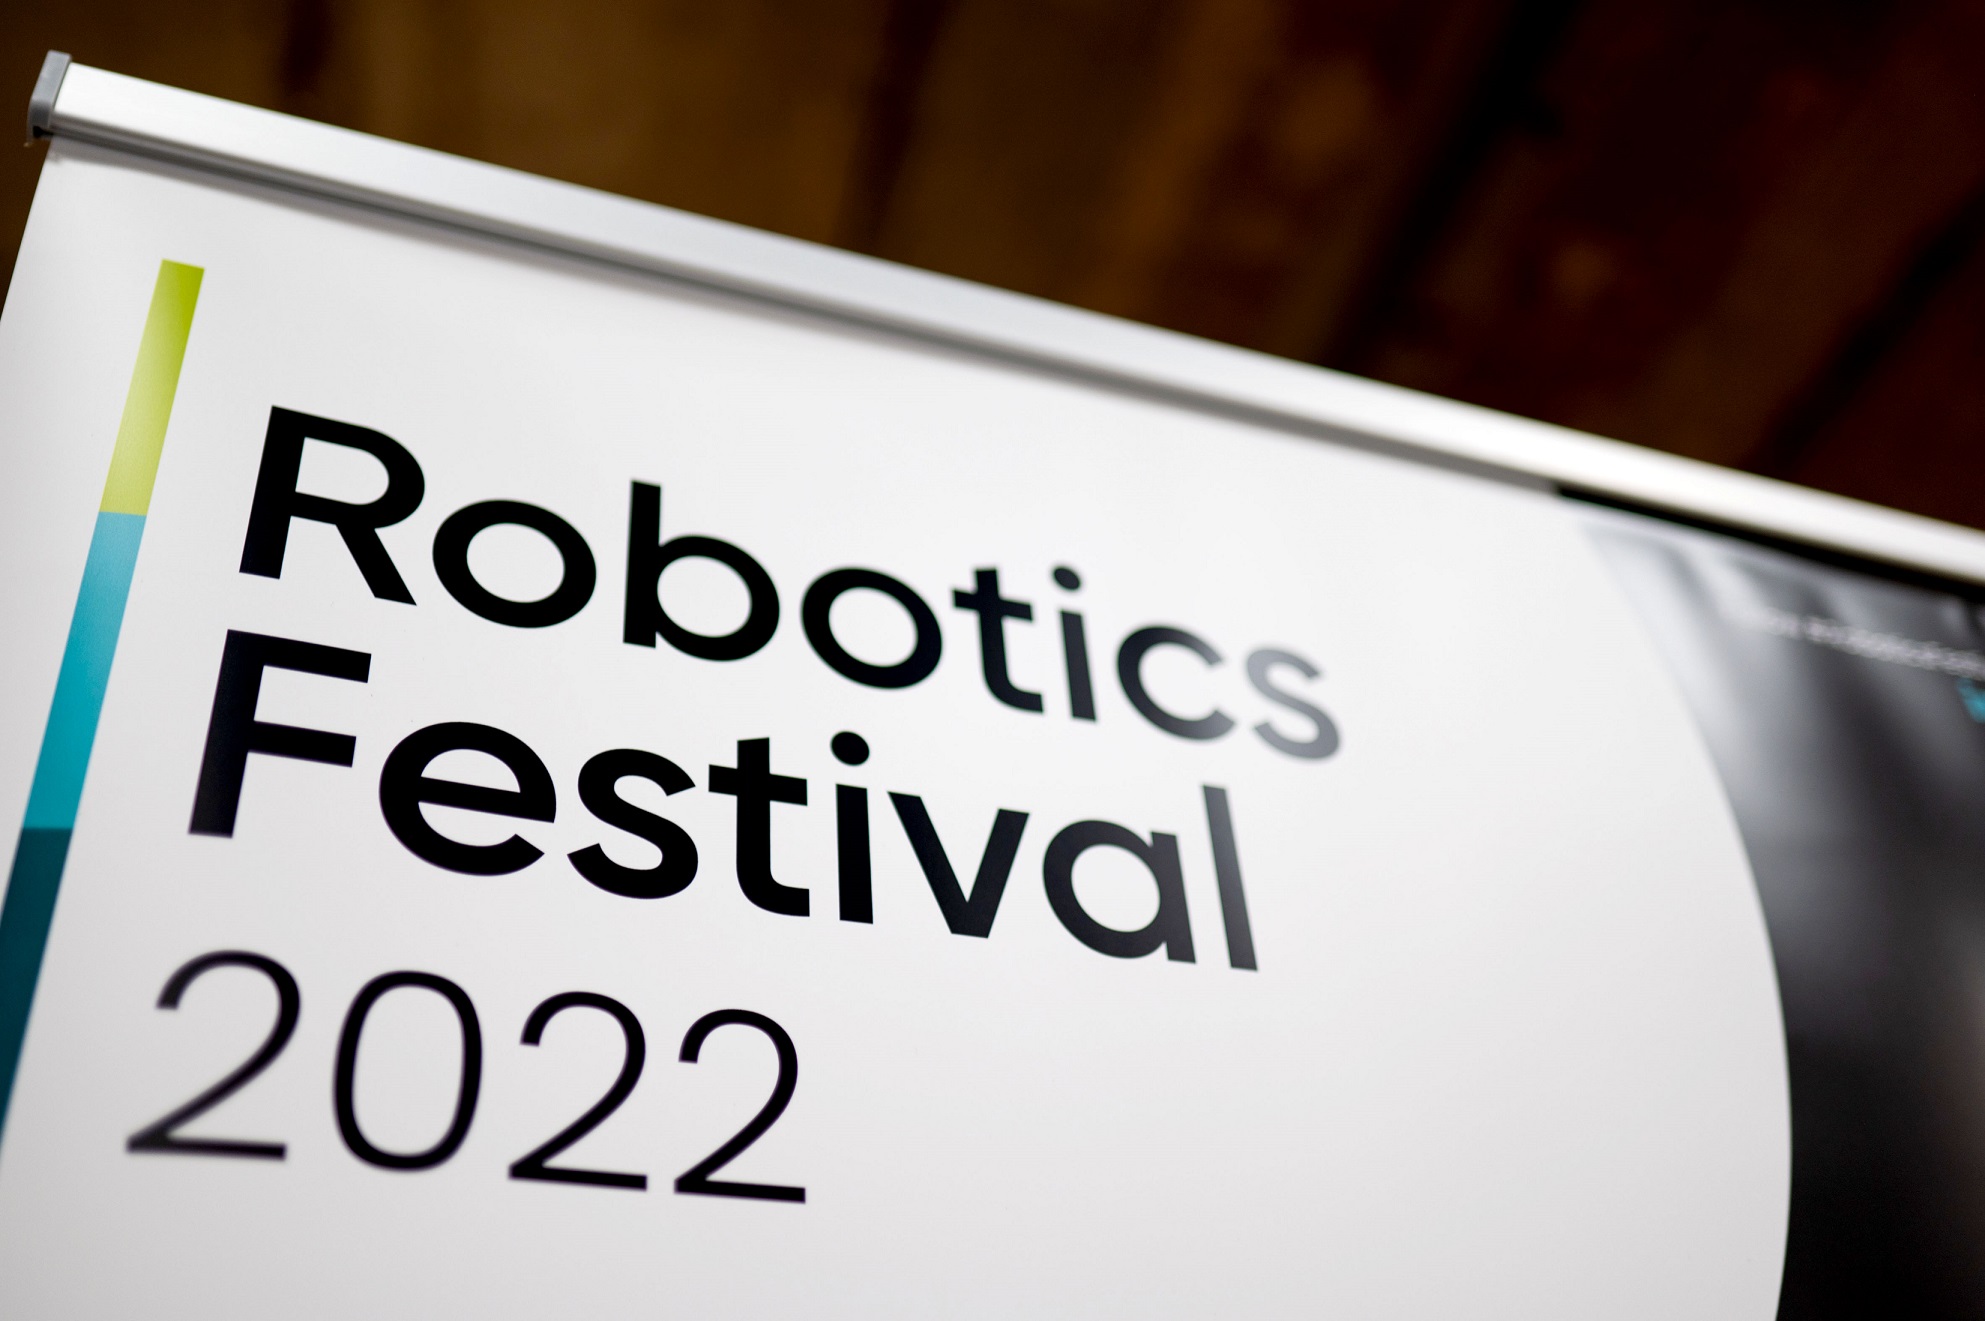 Picture of a poster with "Robotics Festival 2022" written on it